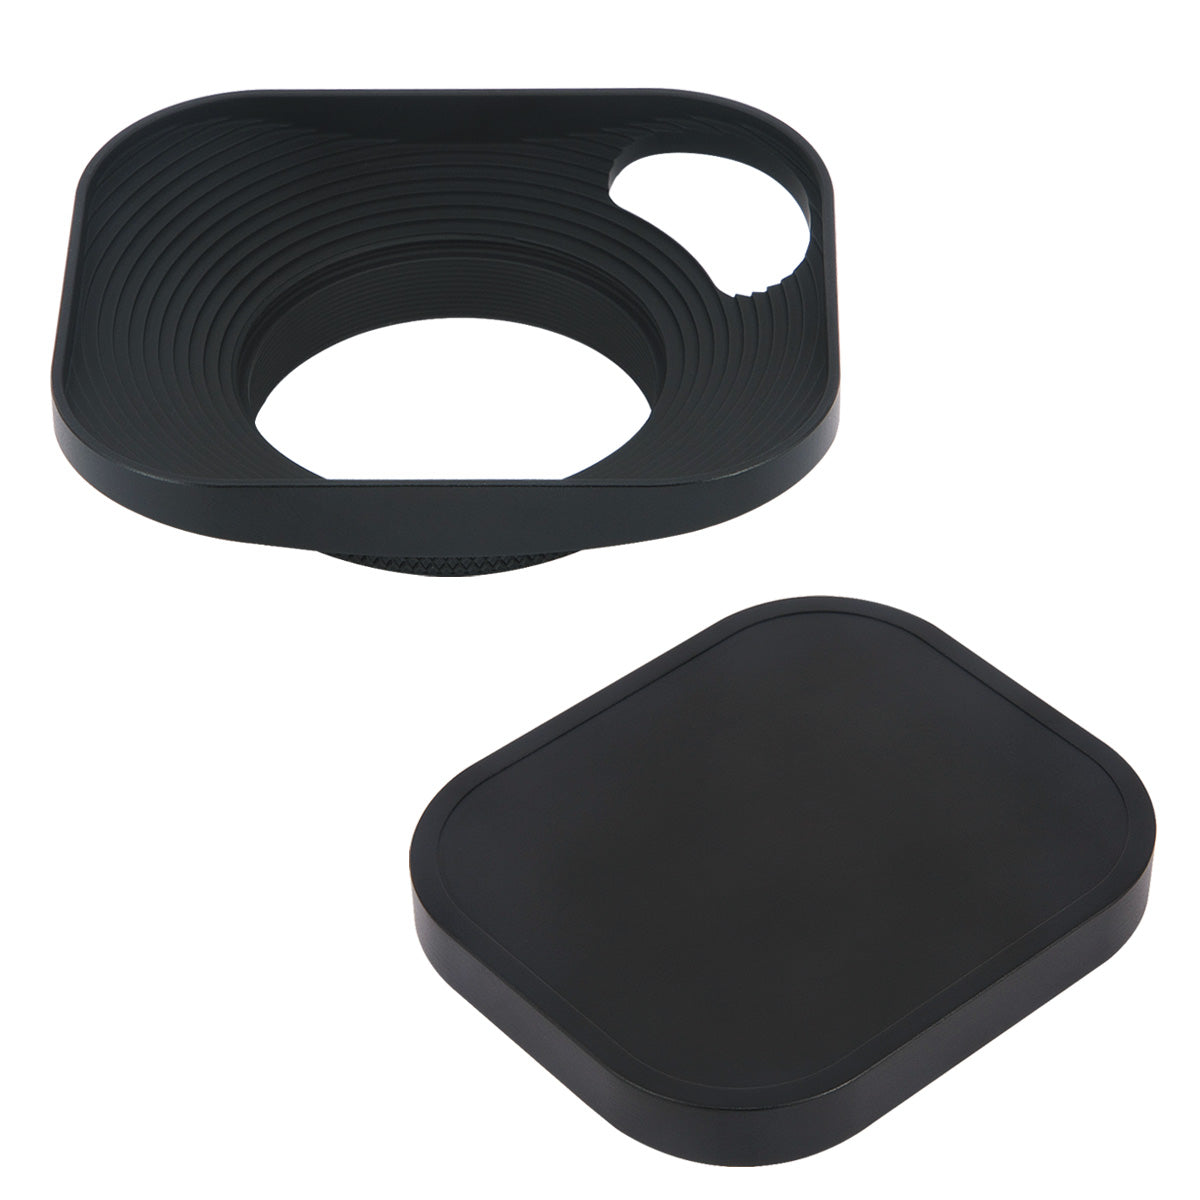 Haoge LH-B39P 39mm Square Metal Screw-in Lens Hood Hollow Out Designed with Cap for Leica Rangefinder Camera with 39mm E39 Filter Thread Lens Black